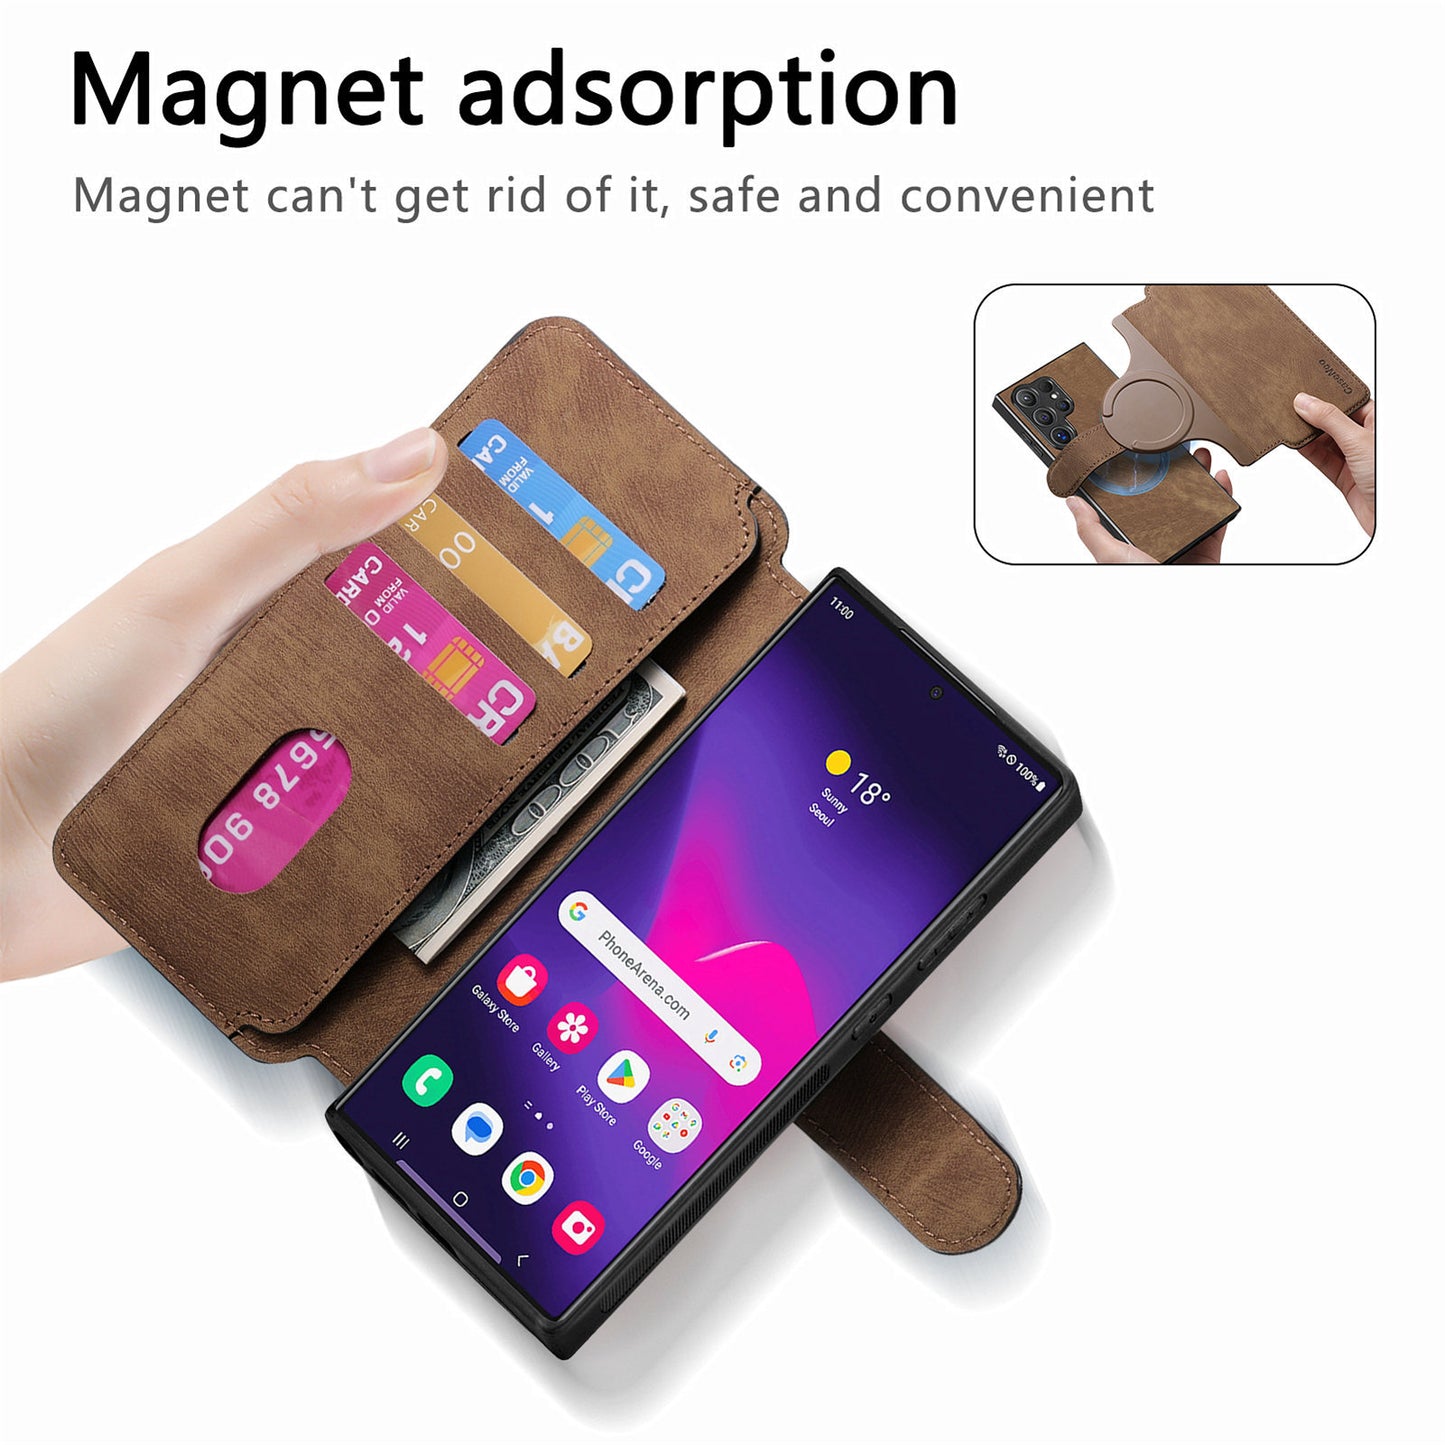 RFID 2-in-1 Detachable Wallet Magnetic Case for Samsung Galaxy